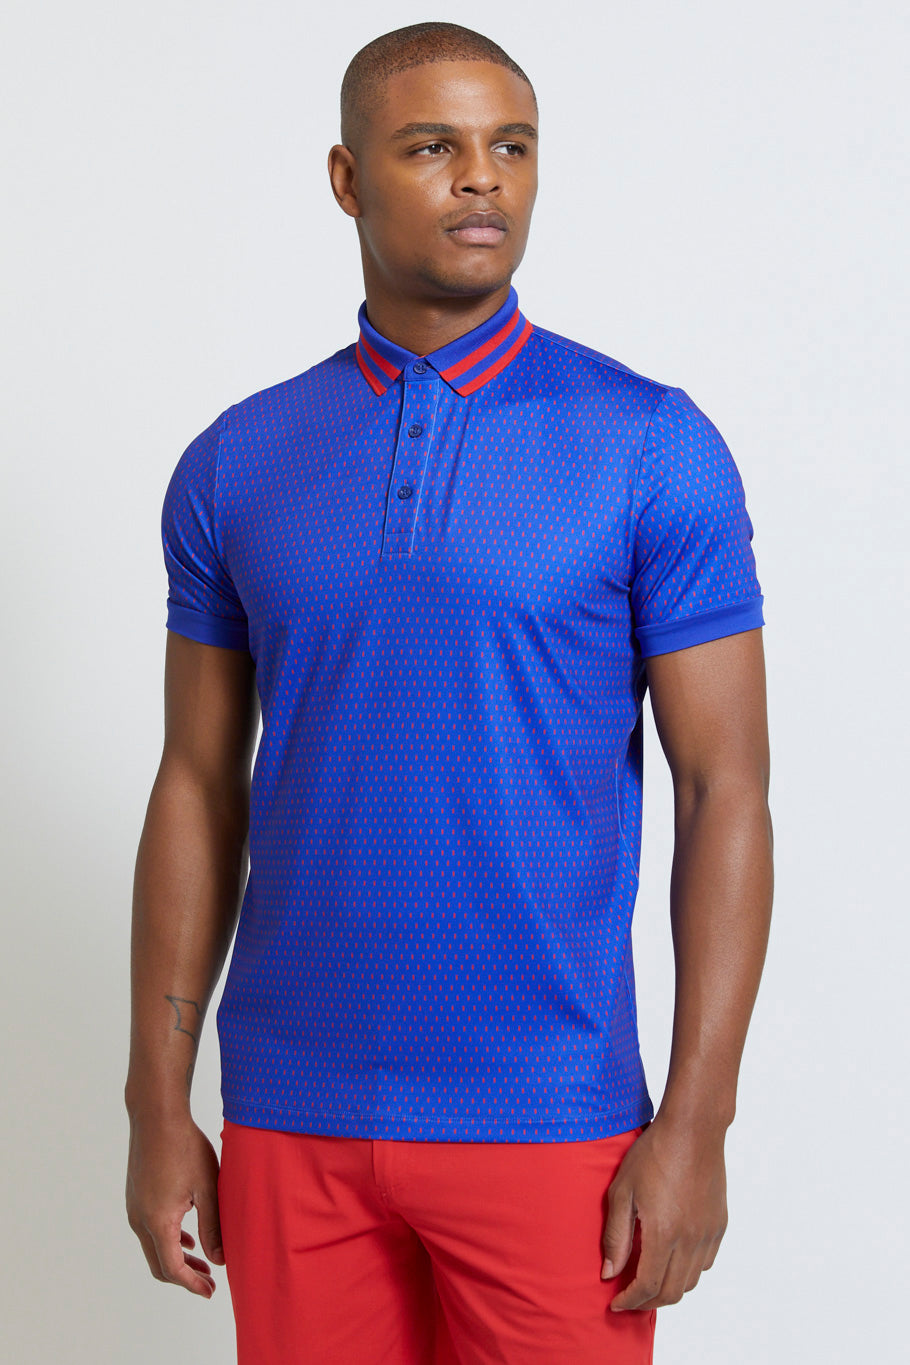 TCarver Polo in Olympic